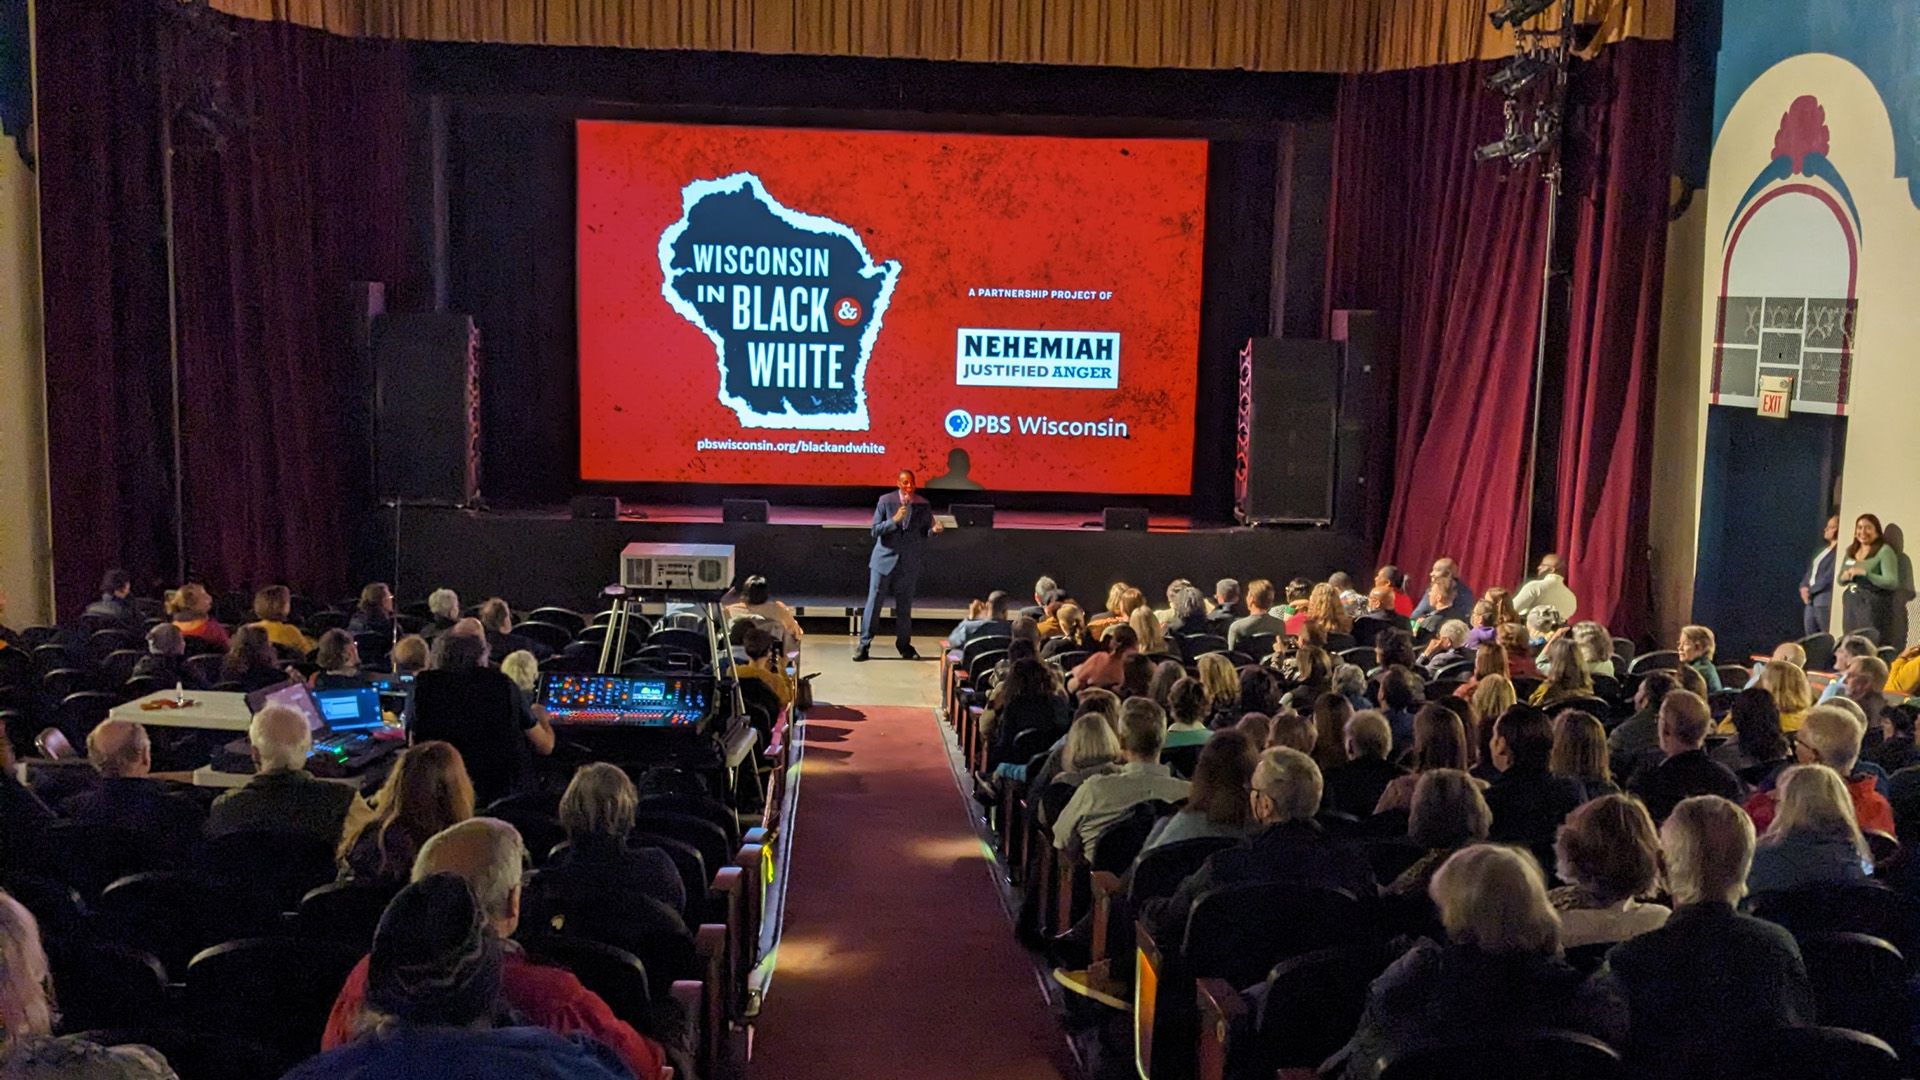 An audience watching a screening of Wisconsin in Black and White.